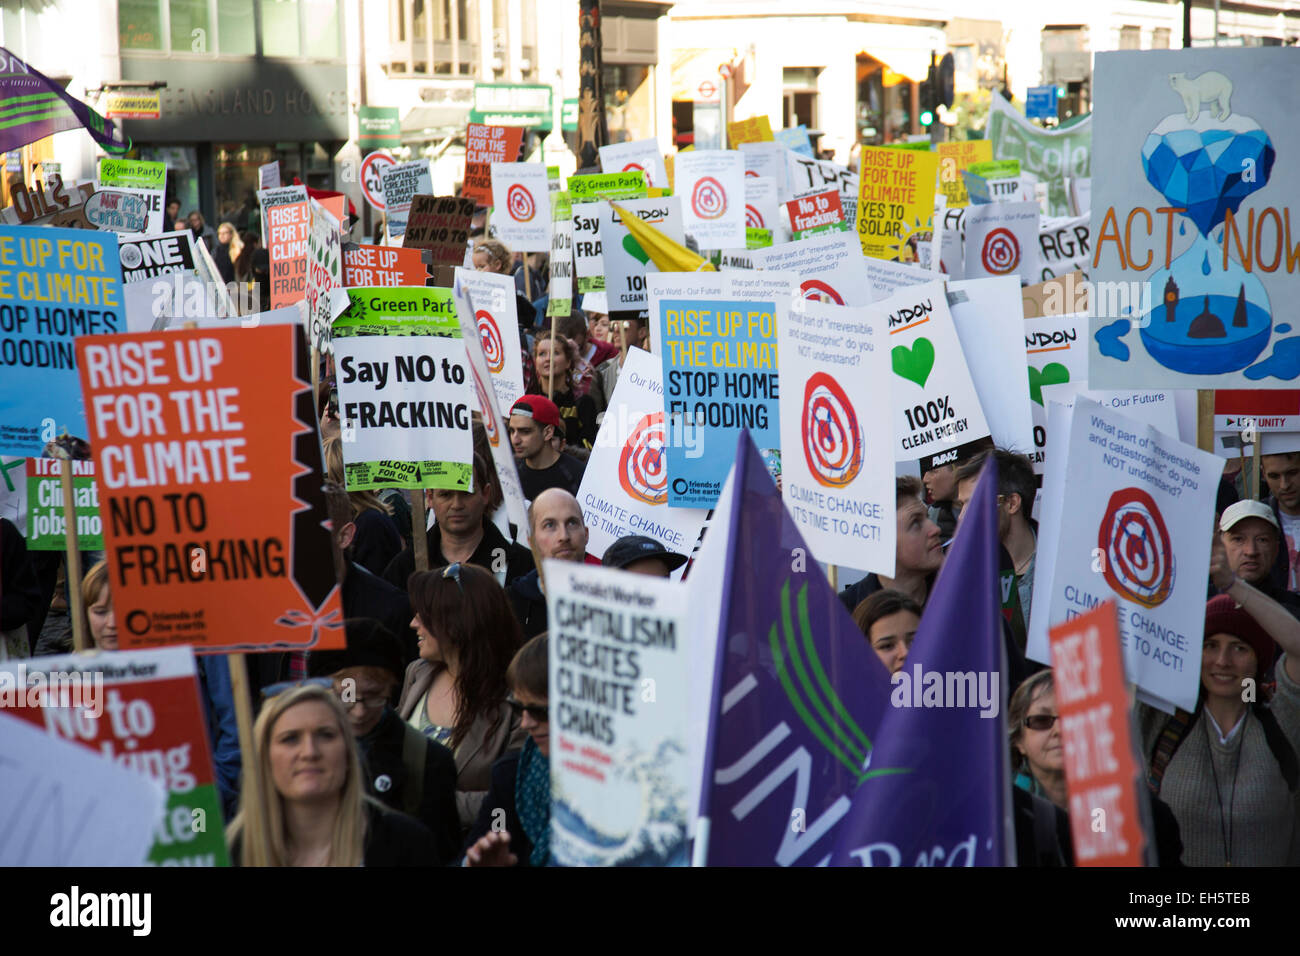 London, UK. Saturday 7th March 2015. Time to Act. Campaign against Climate Change demonstration. Demonstrators gathered in their tens of thousands to protest against all kinds of environmental issues such as fracking, clean air, alternative energies and generally all business which puts profit before the environment. Credit:  Michael Kemp/Alamy Live News Stock Photo